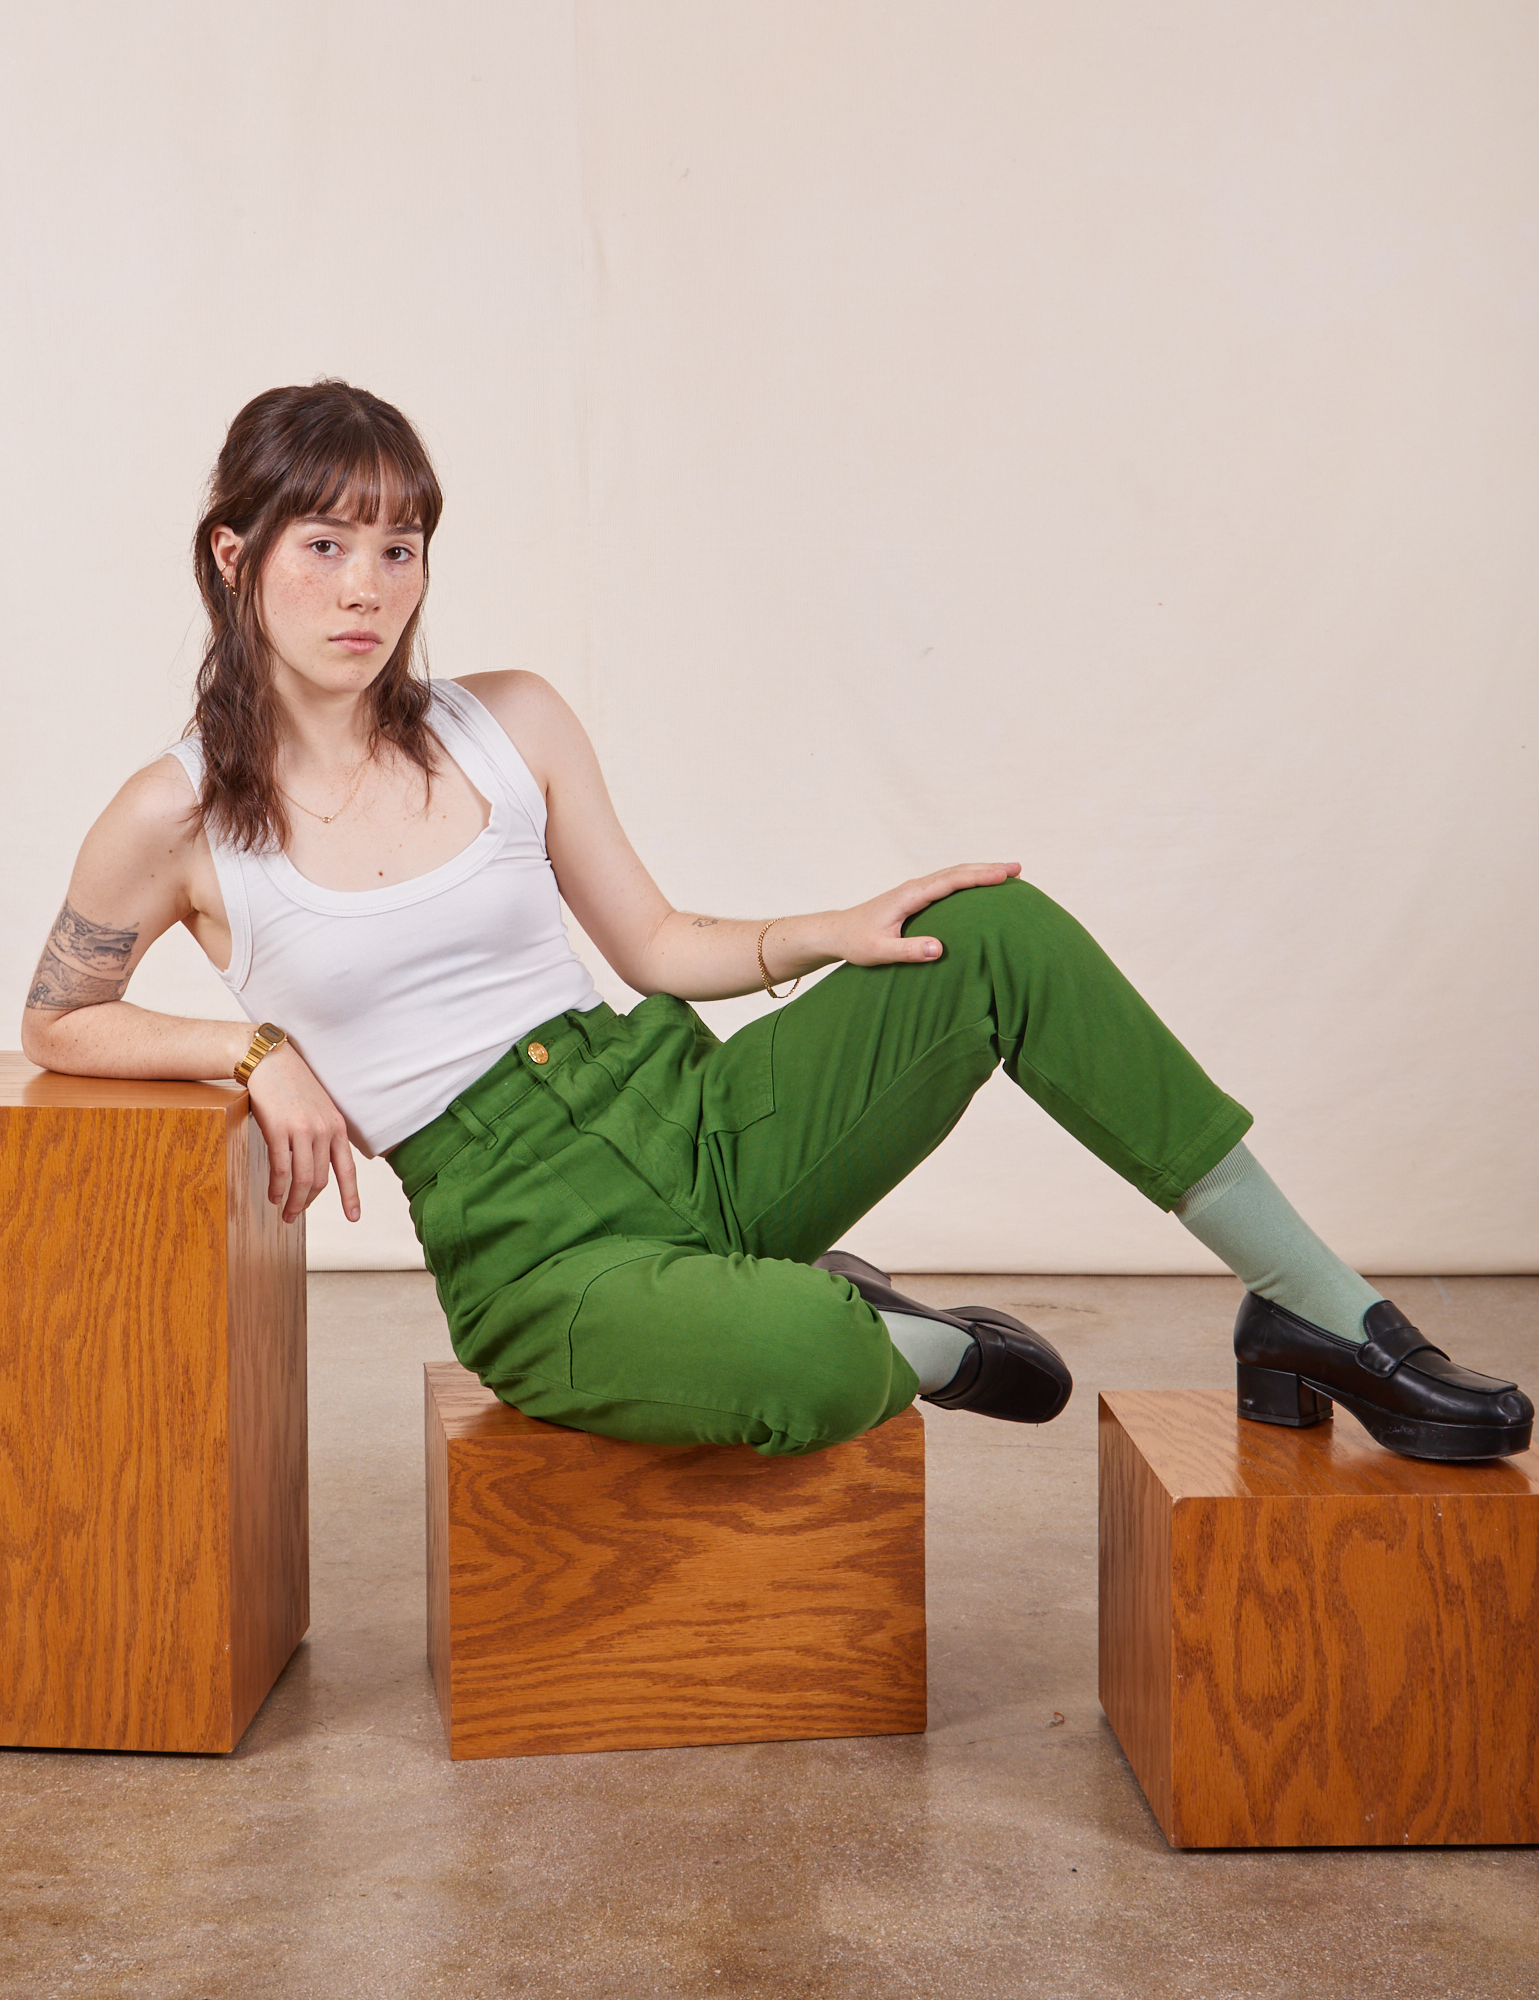 Hana is wearing Petite Pencil Pants in Lawn Green and Cropped Tank Top in vintage tee off-white